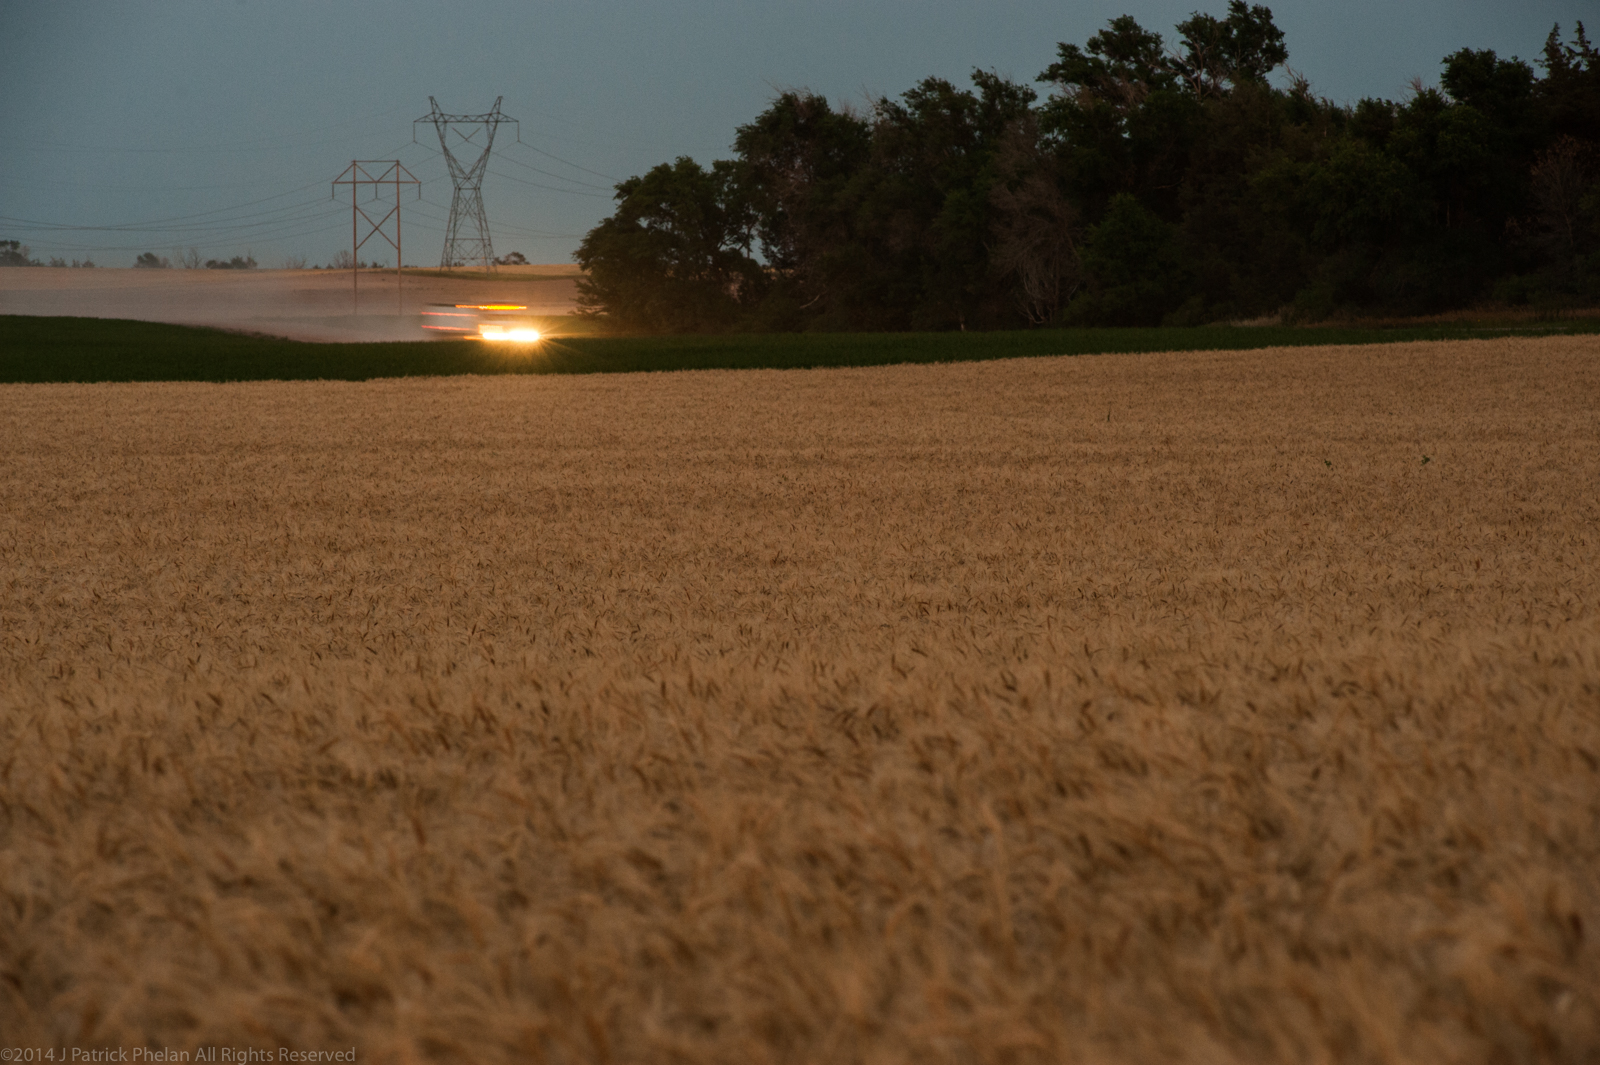 A horizontal image of a wheat field waiting to be harvested in the bottom 3/4s of the frame support a tree line and country road that is just out of site as a farm truck heads to the combines to pick up a fresh load of grain. The sky silhouettes two power line towers and lines that fill the top left corner of the frame with a muted blue evening sky.